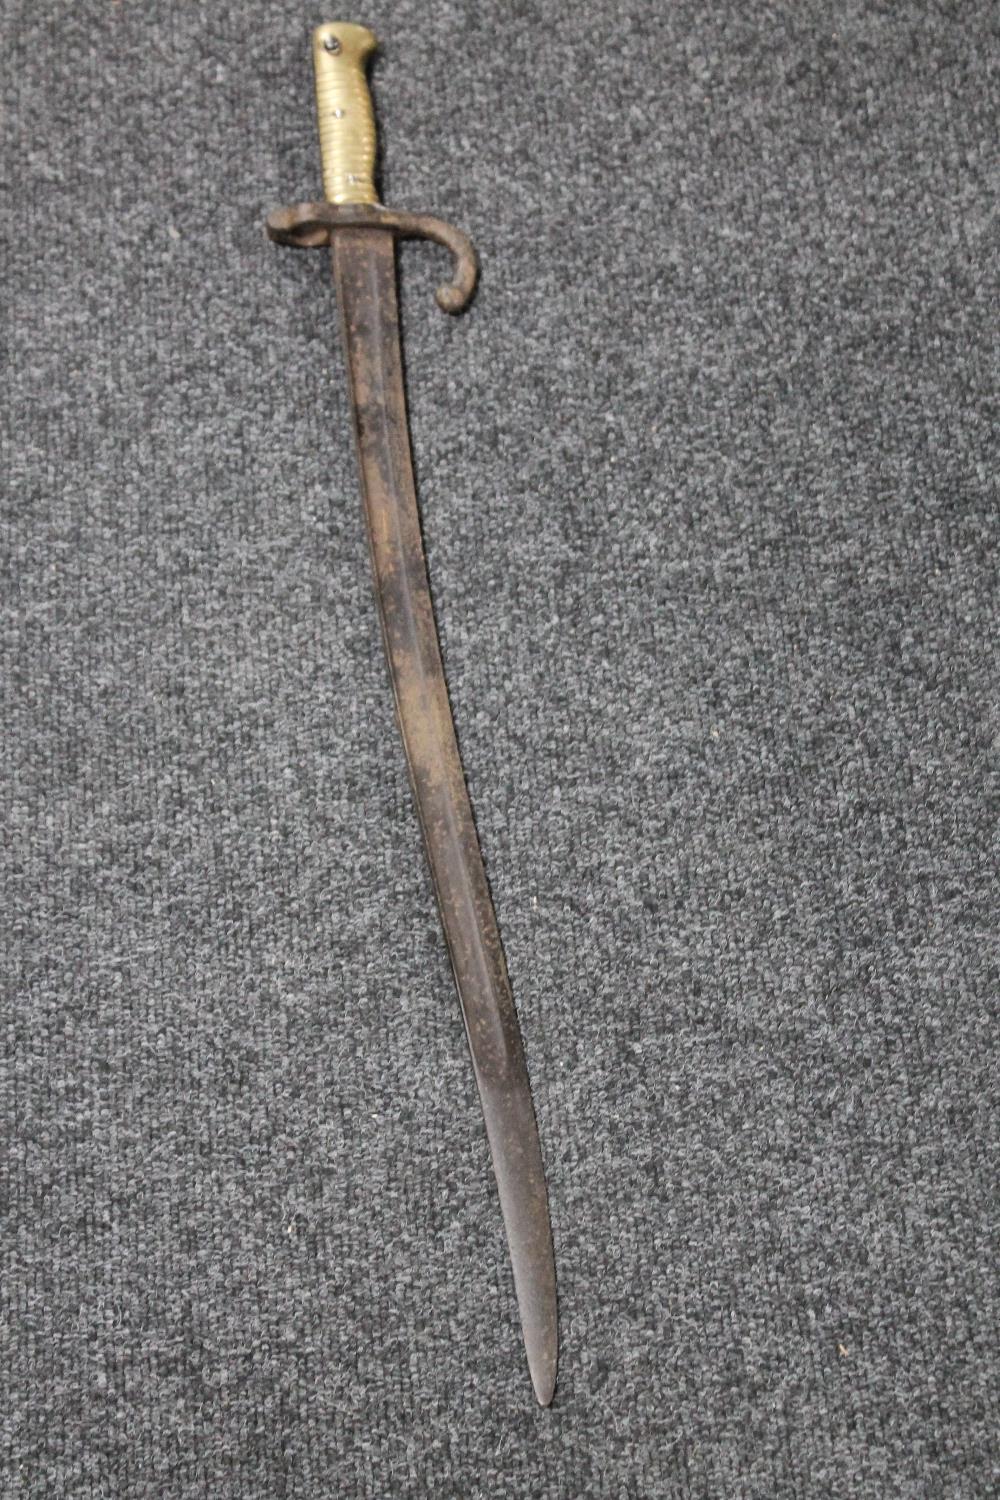 A French Chassepot sword bayonet